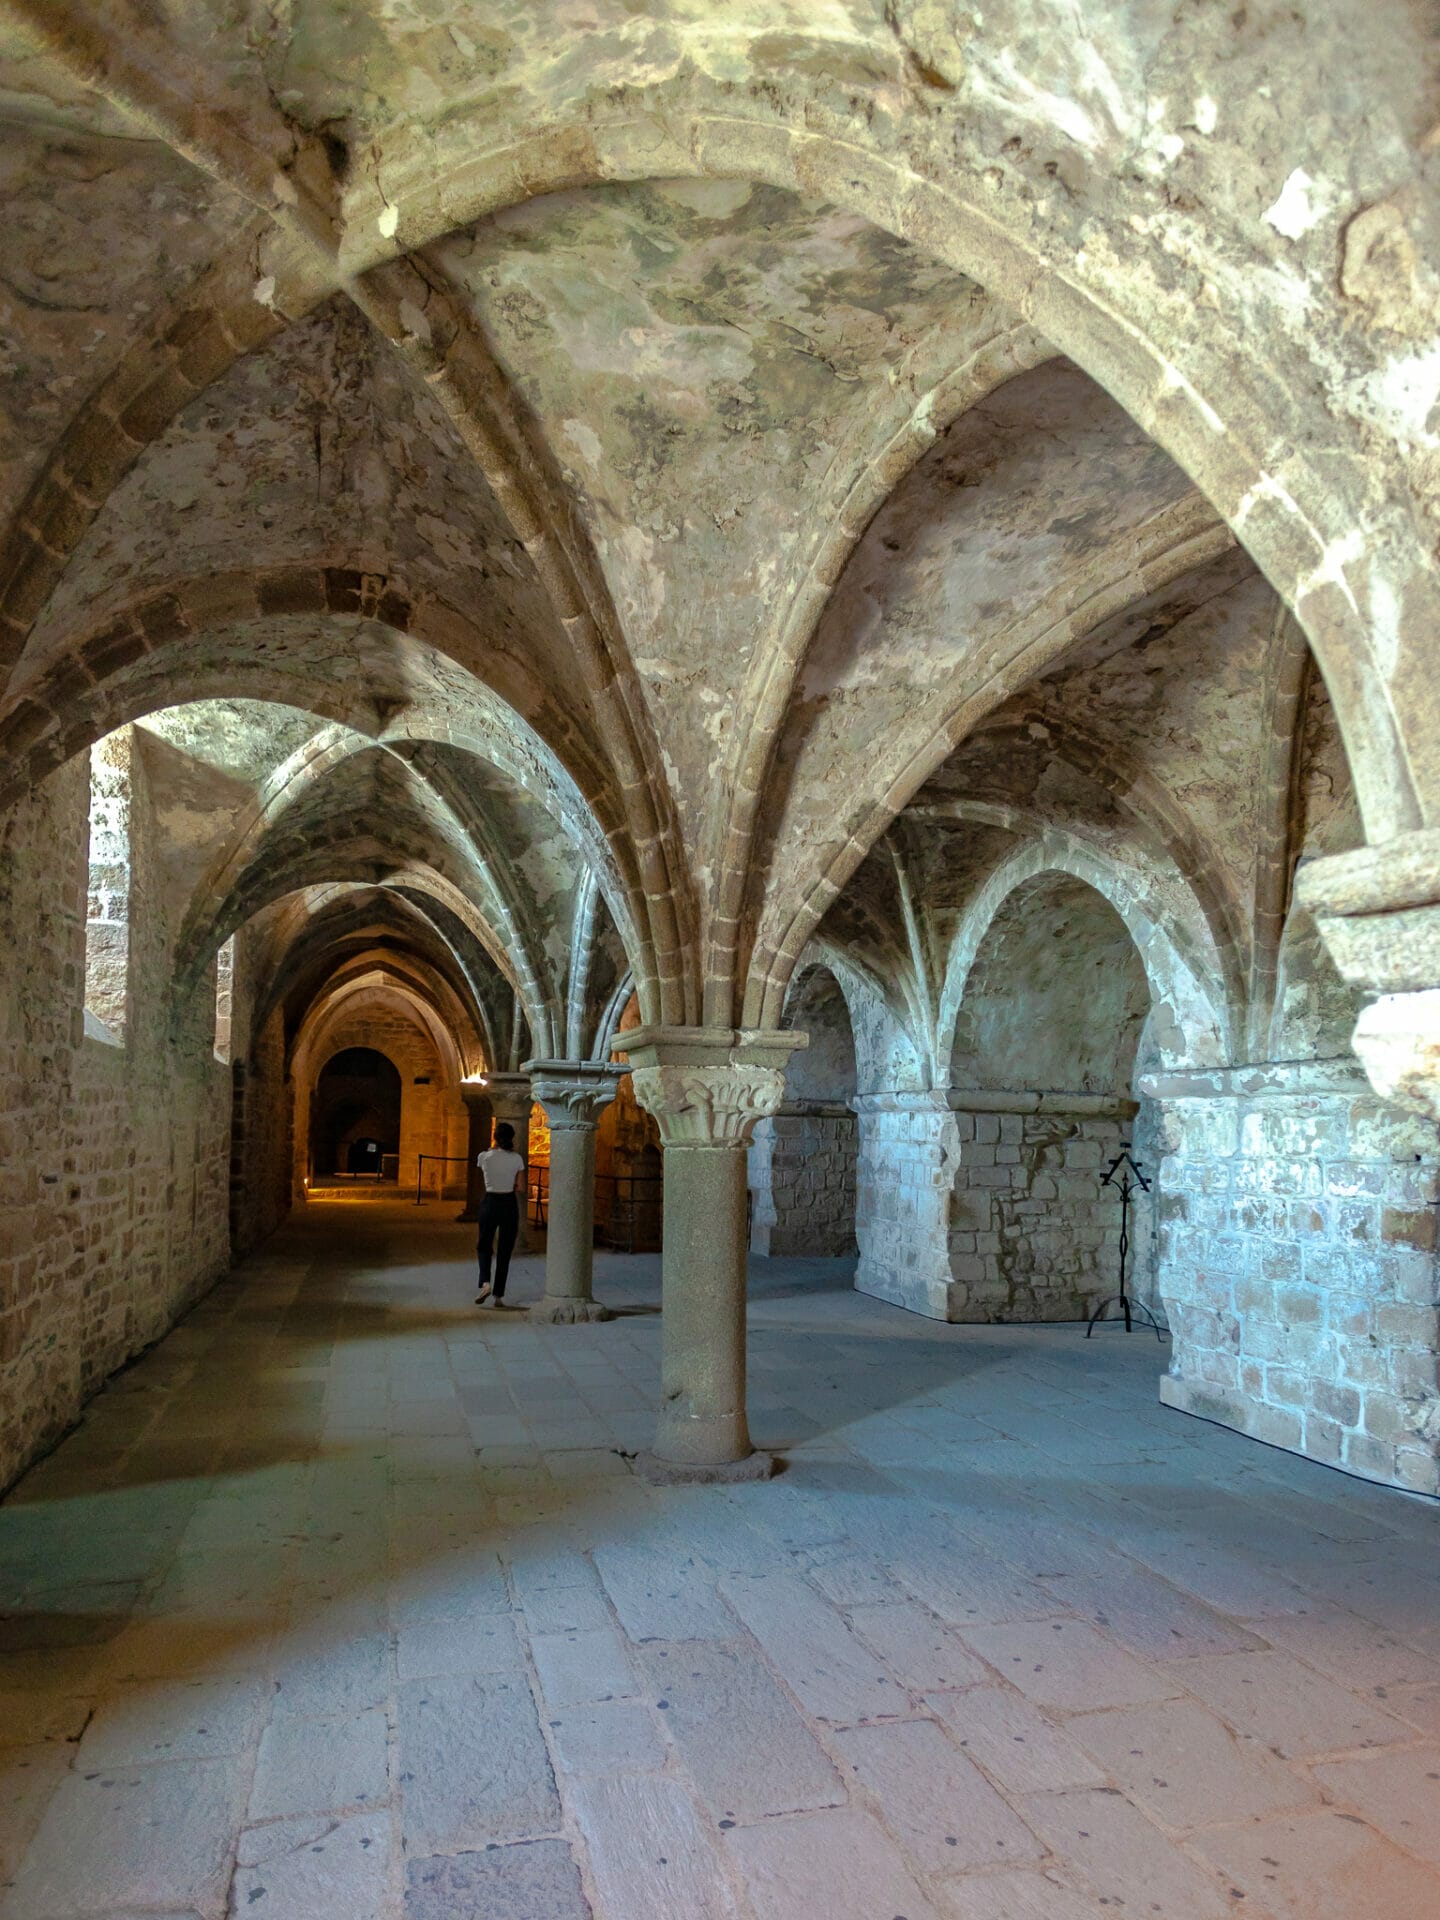 Vaulted ceiling inside foundation of the lower Abbey chambers in Mont Saint Michel